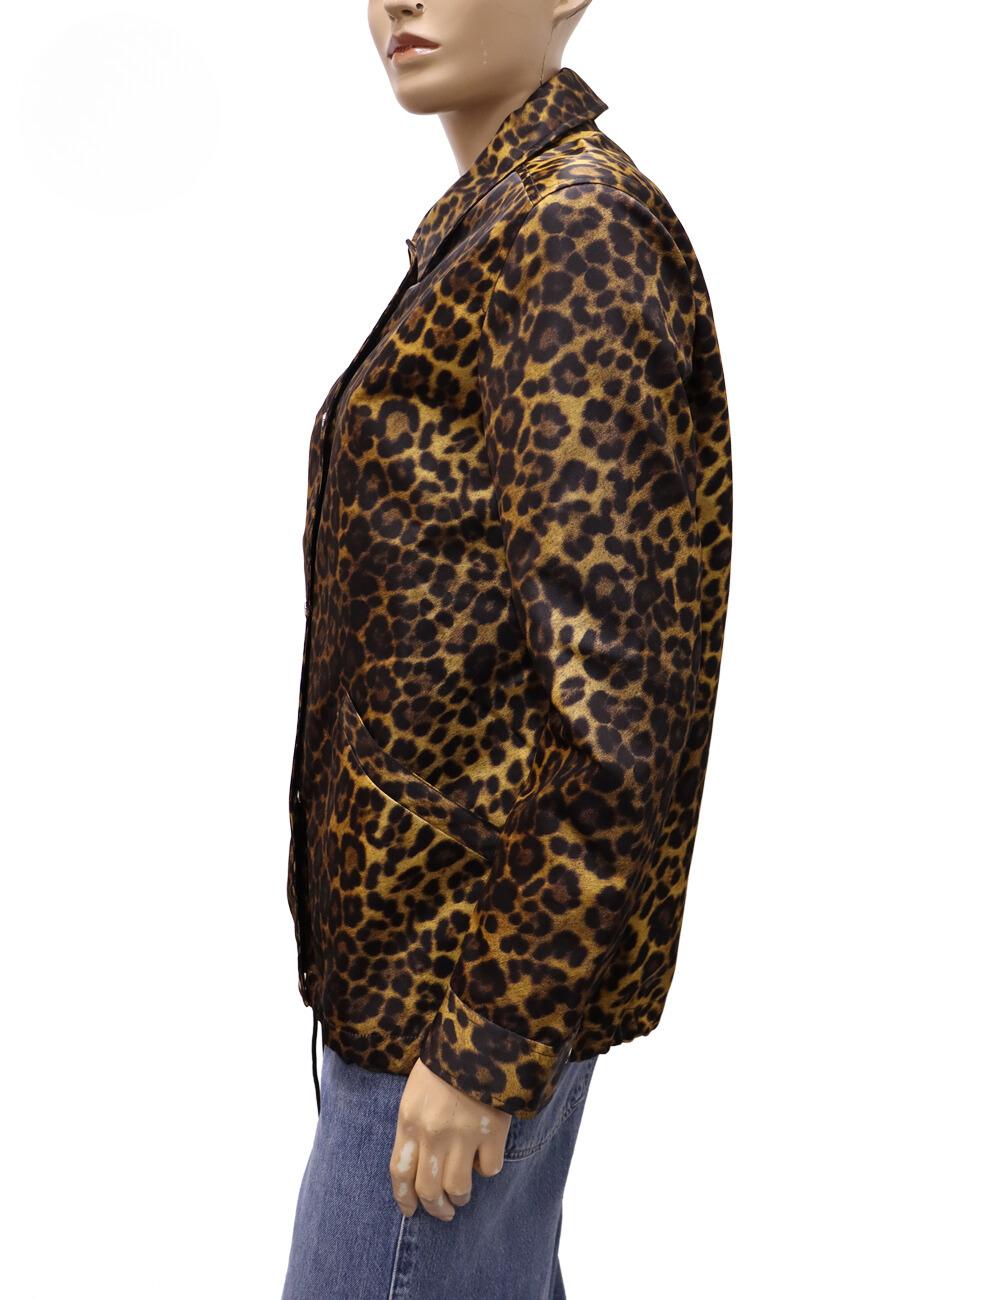 Alexander Wang Animal Print Utility Jacket, Features Animal Print, Pointed Collar, Slit Pockets and Button Closure.

Material: 100% Nylon
Size: EU 34 / XS / Runs Big
Bust: 102cm
Waist: 100cm
Hip: 104cm
Overall Condition: Excellent